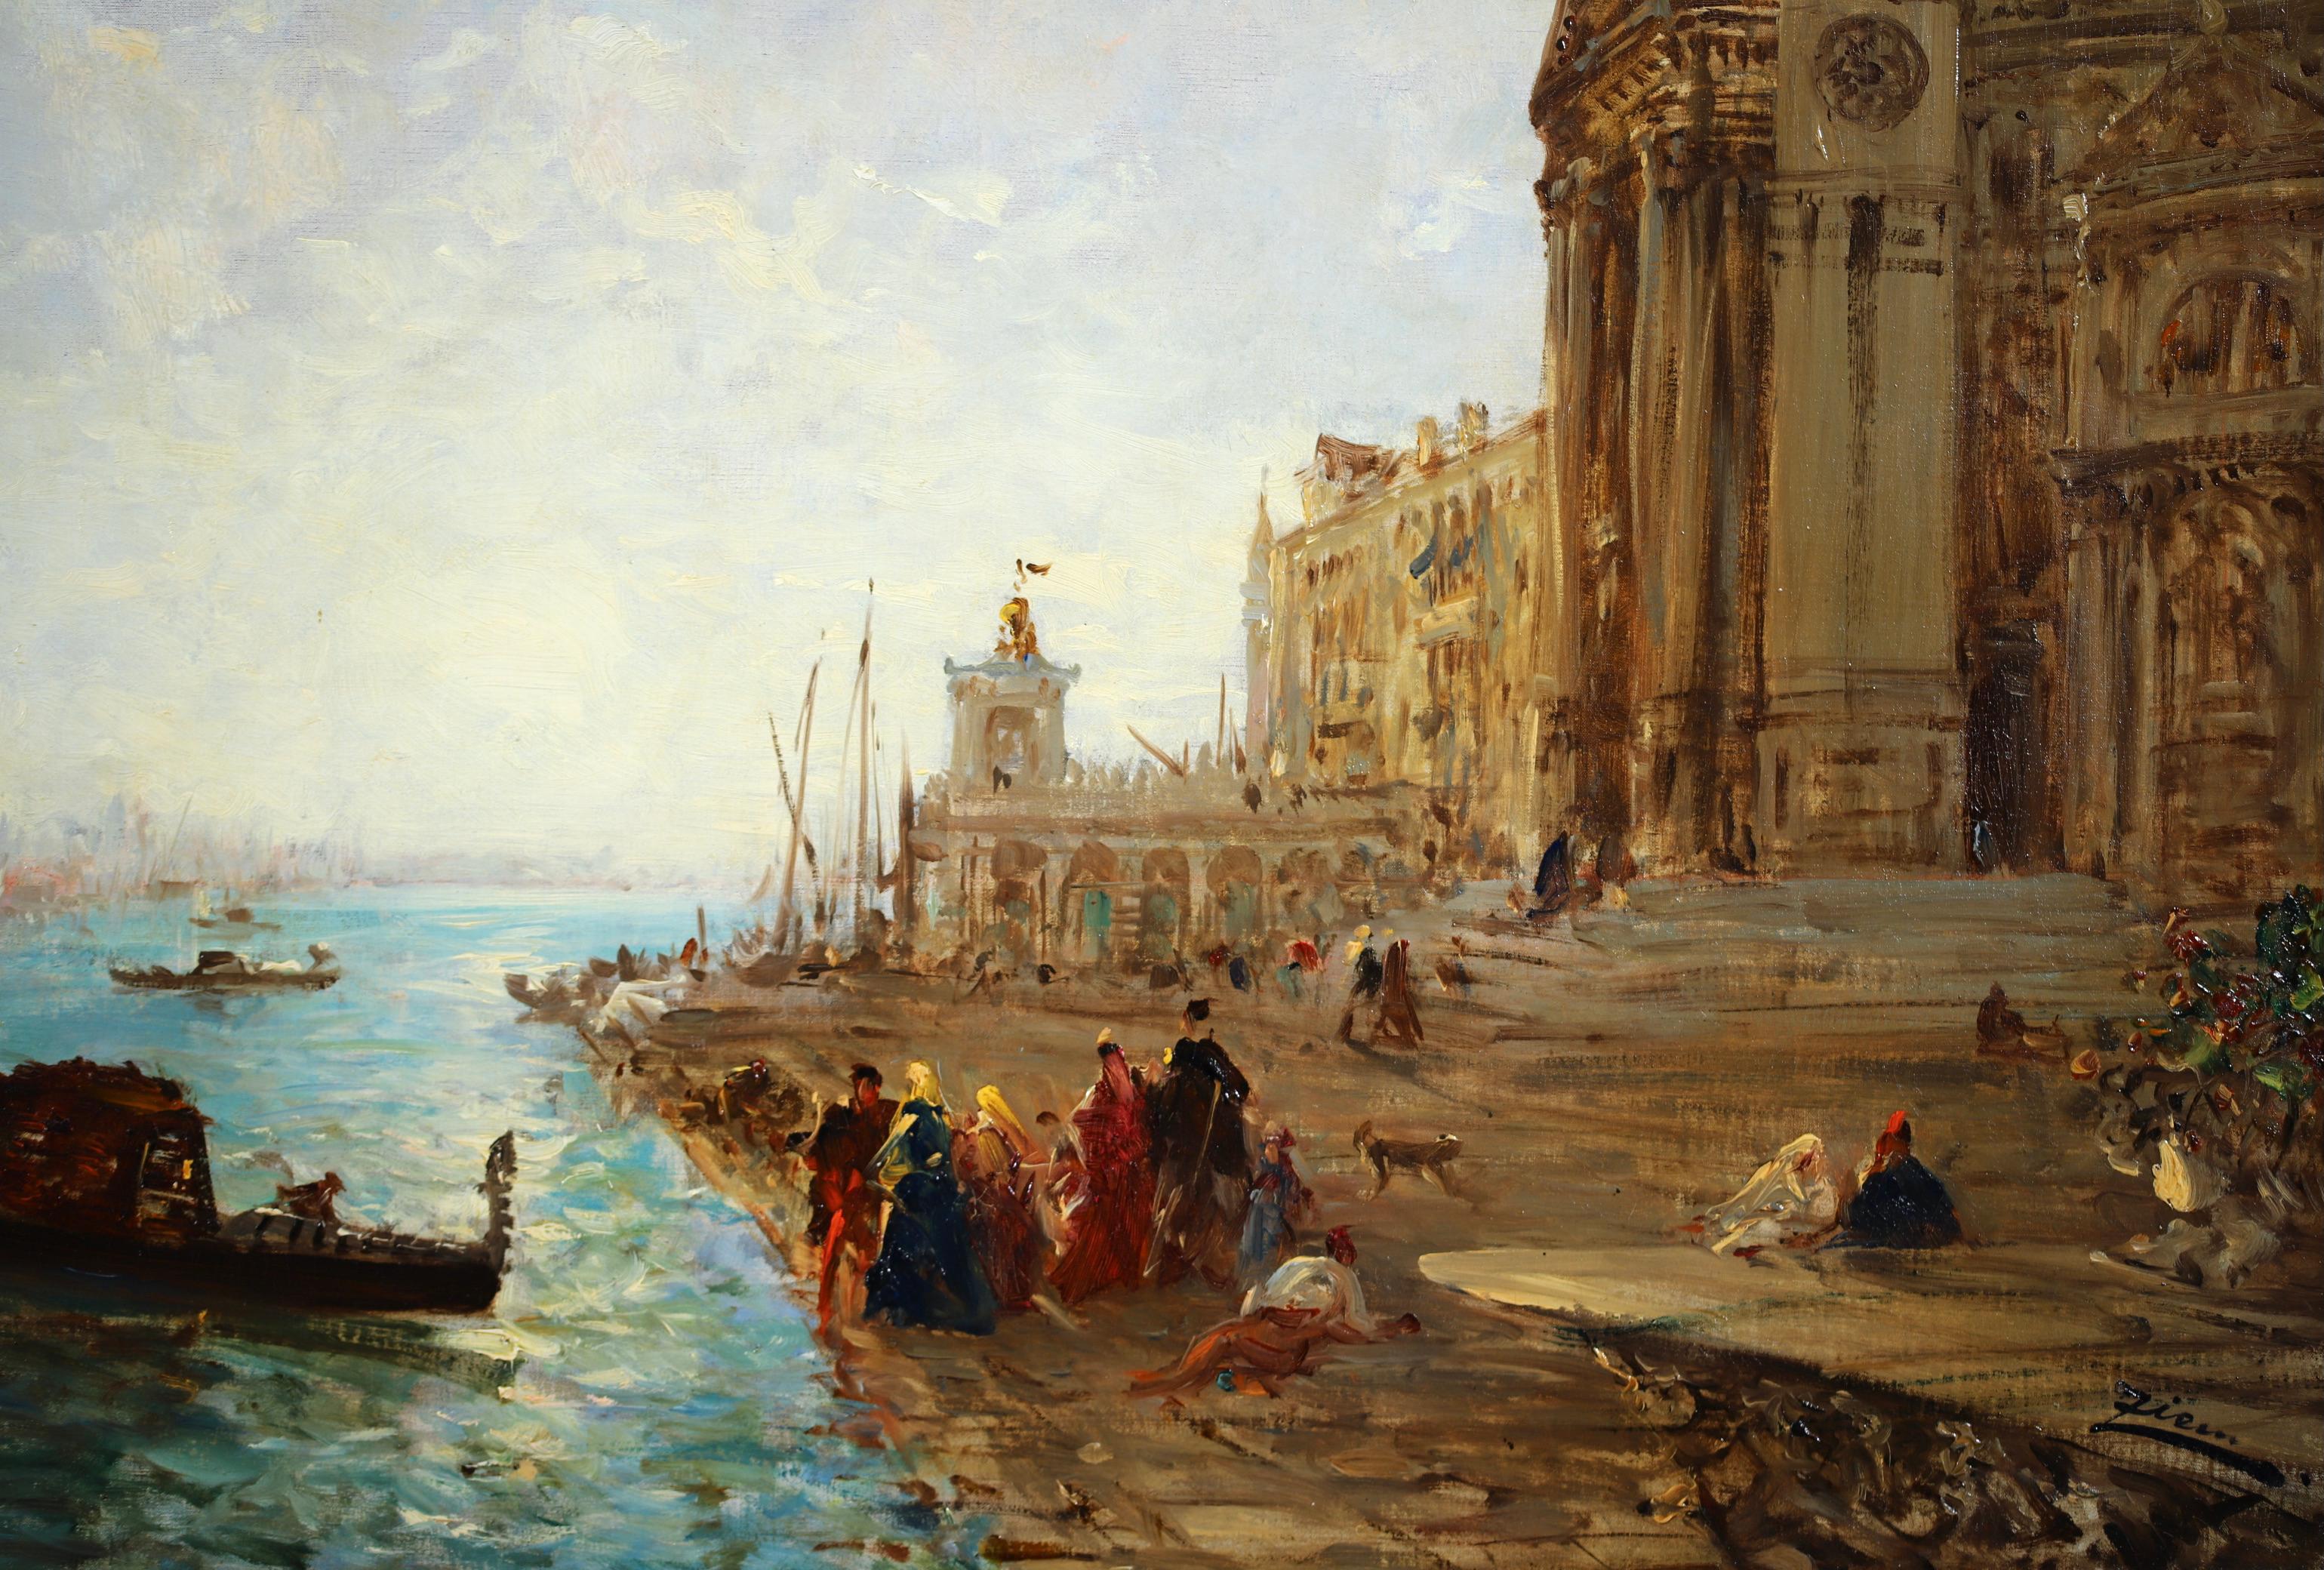 Signed orientalist landscape oil on canvas circa 1875 by French impressionist painter Felix Francois Georges Philbert Ziem. The work depicts the Santa Maria della Salue - an important Roman Catholic church - which stands on The Grand Canal in